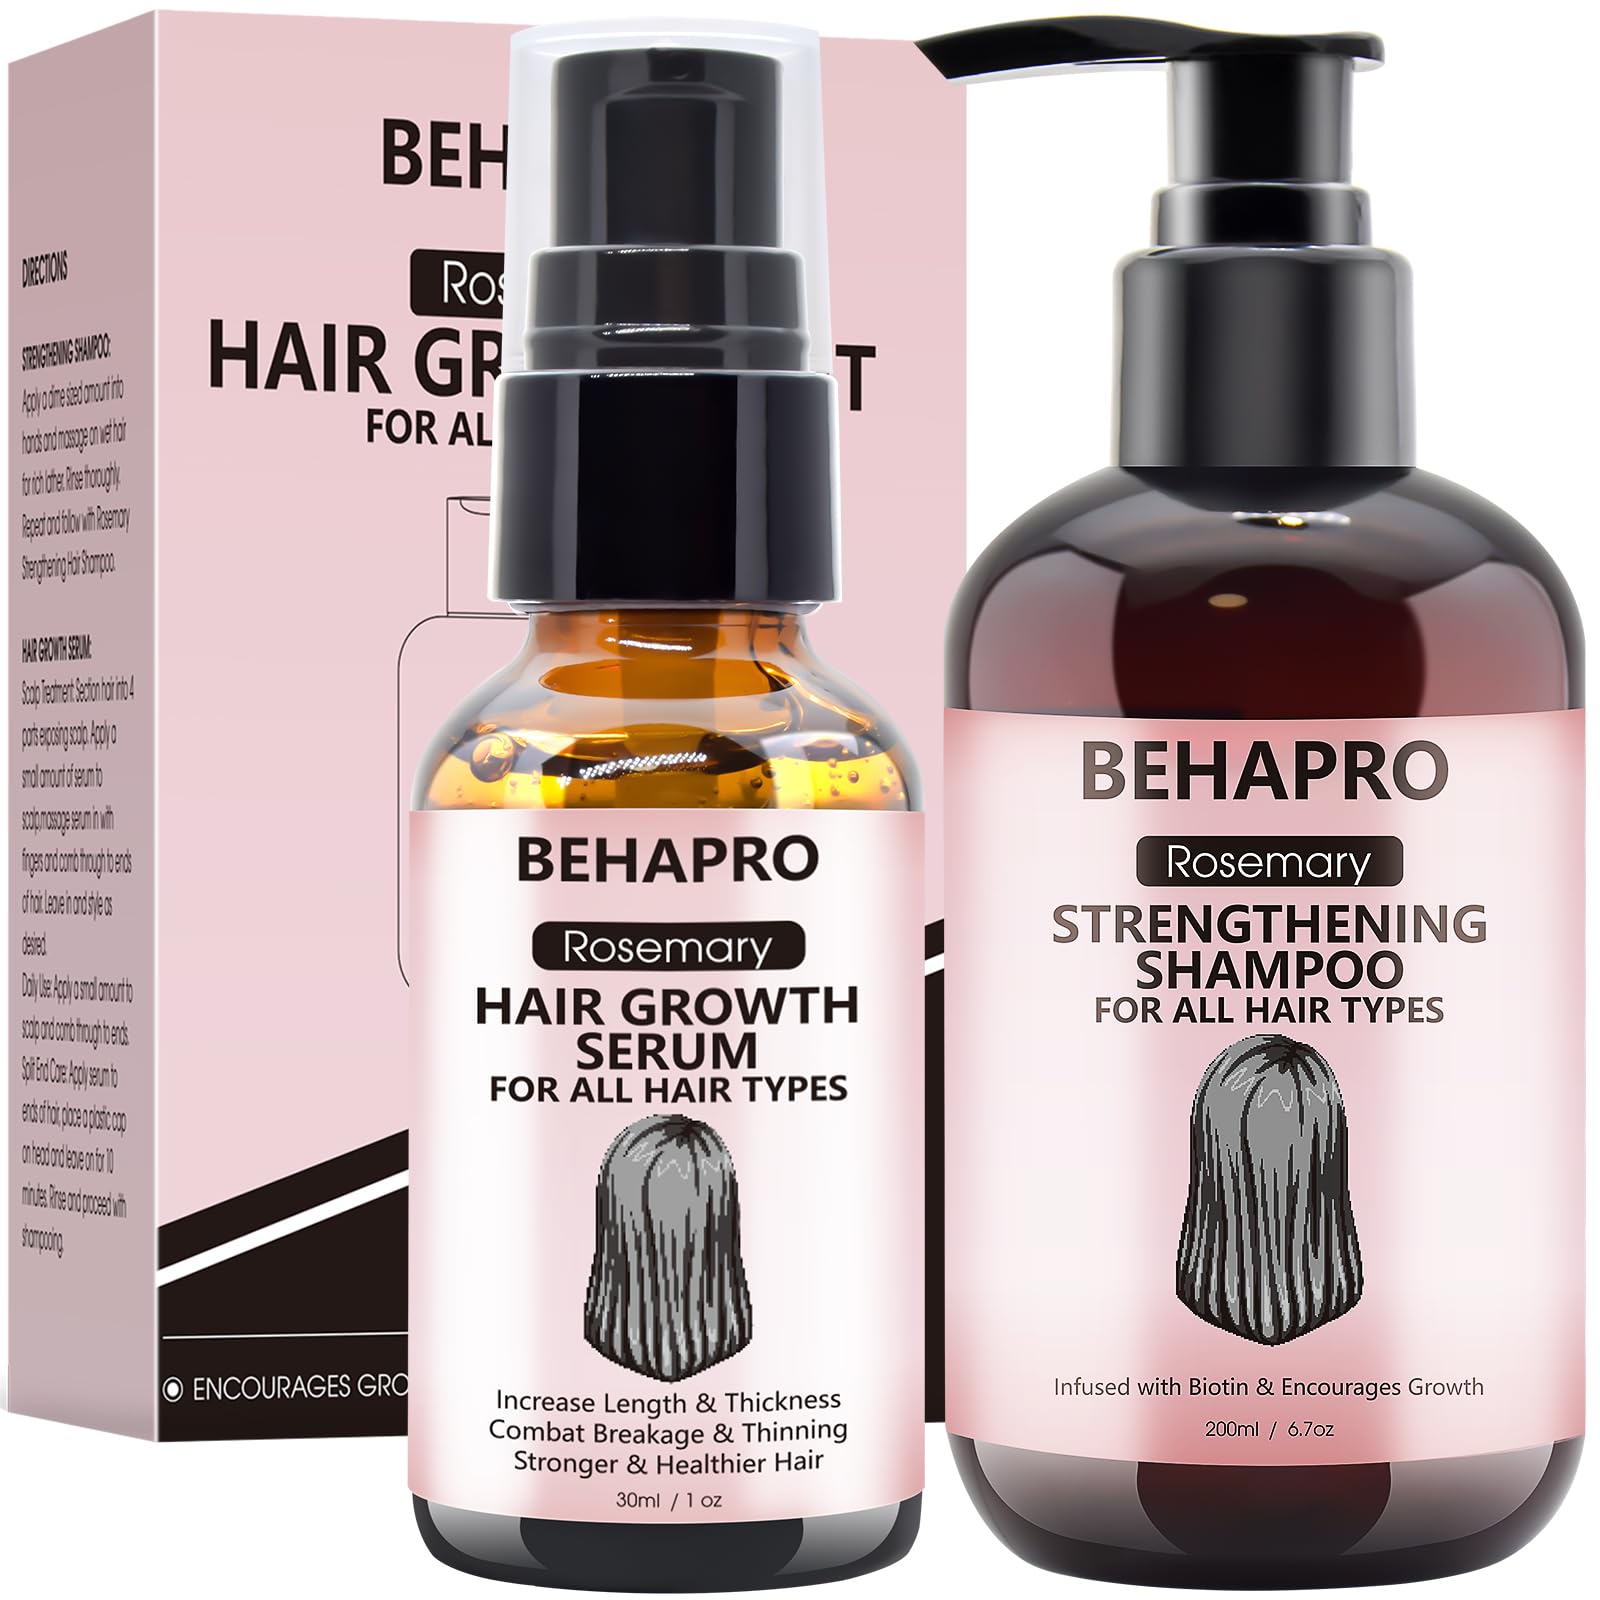 BEHAPRO Rosemary Oil for Hair Growth,w/Hair Growth Serum,Hair Growth Shampoo,Diluted Rosemary Oil Biotin Castor Oil & Argan Oil for Hair Loss Care Treatment Hair Thickening Products for Women Men - Ammpoure Wellbeing